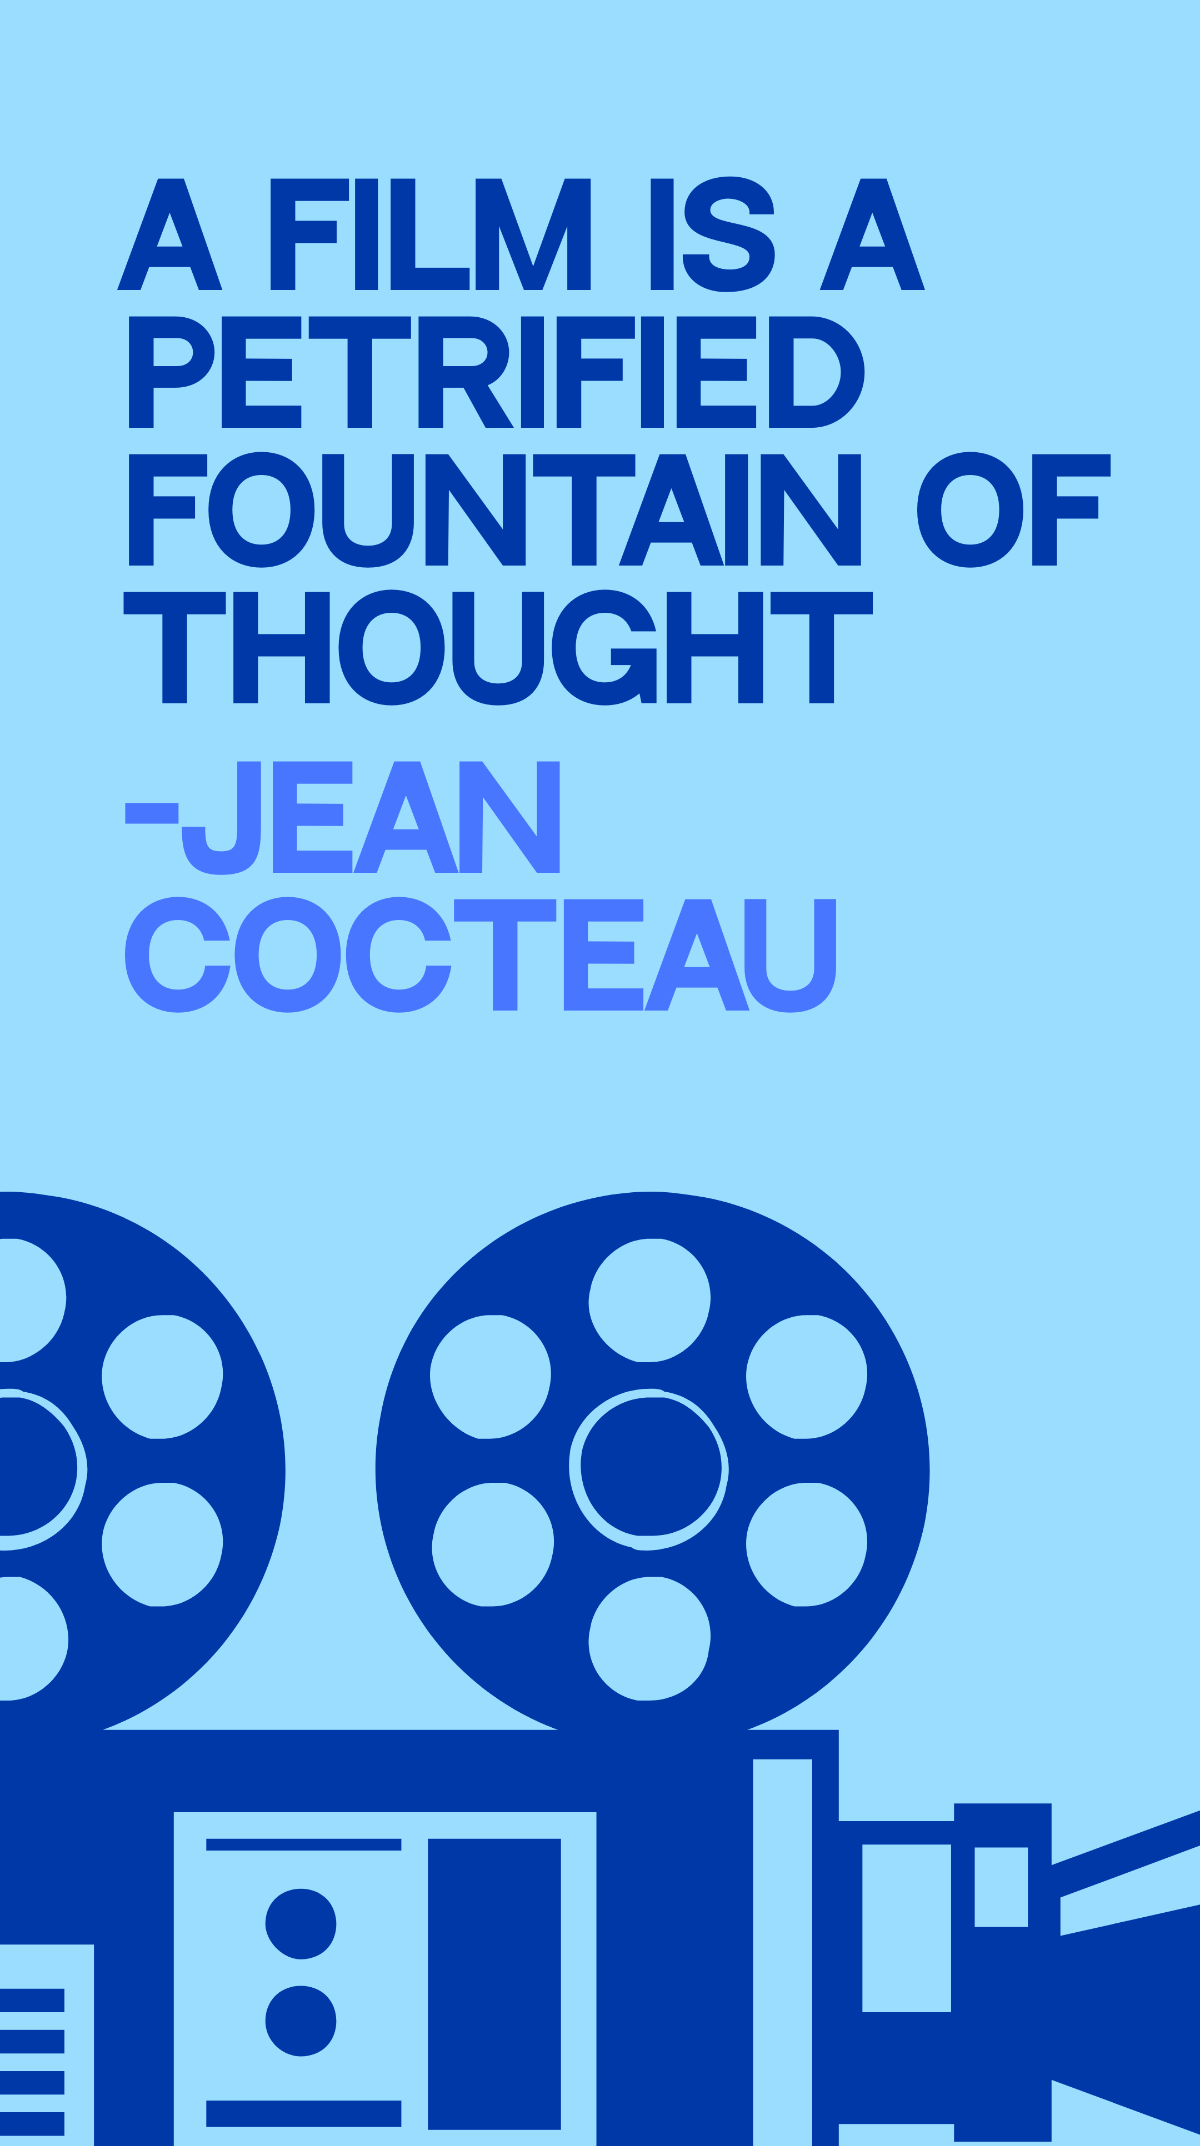 Jean Cocteau - A film is a petrified fountain of thought Template